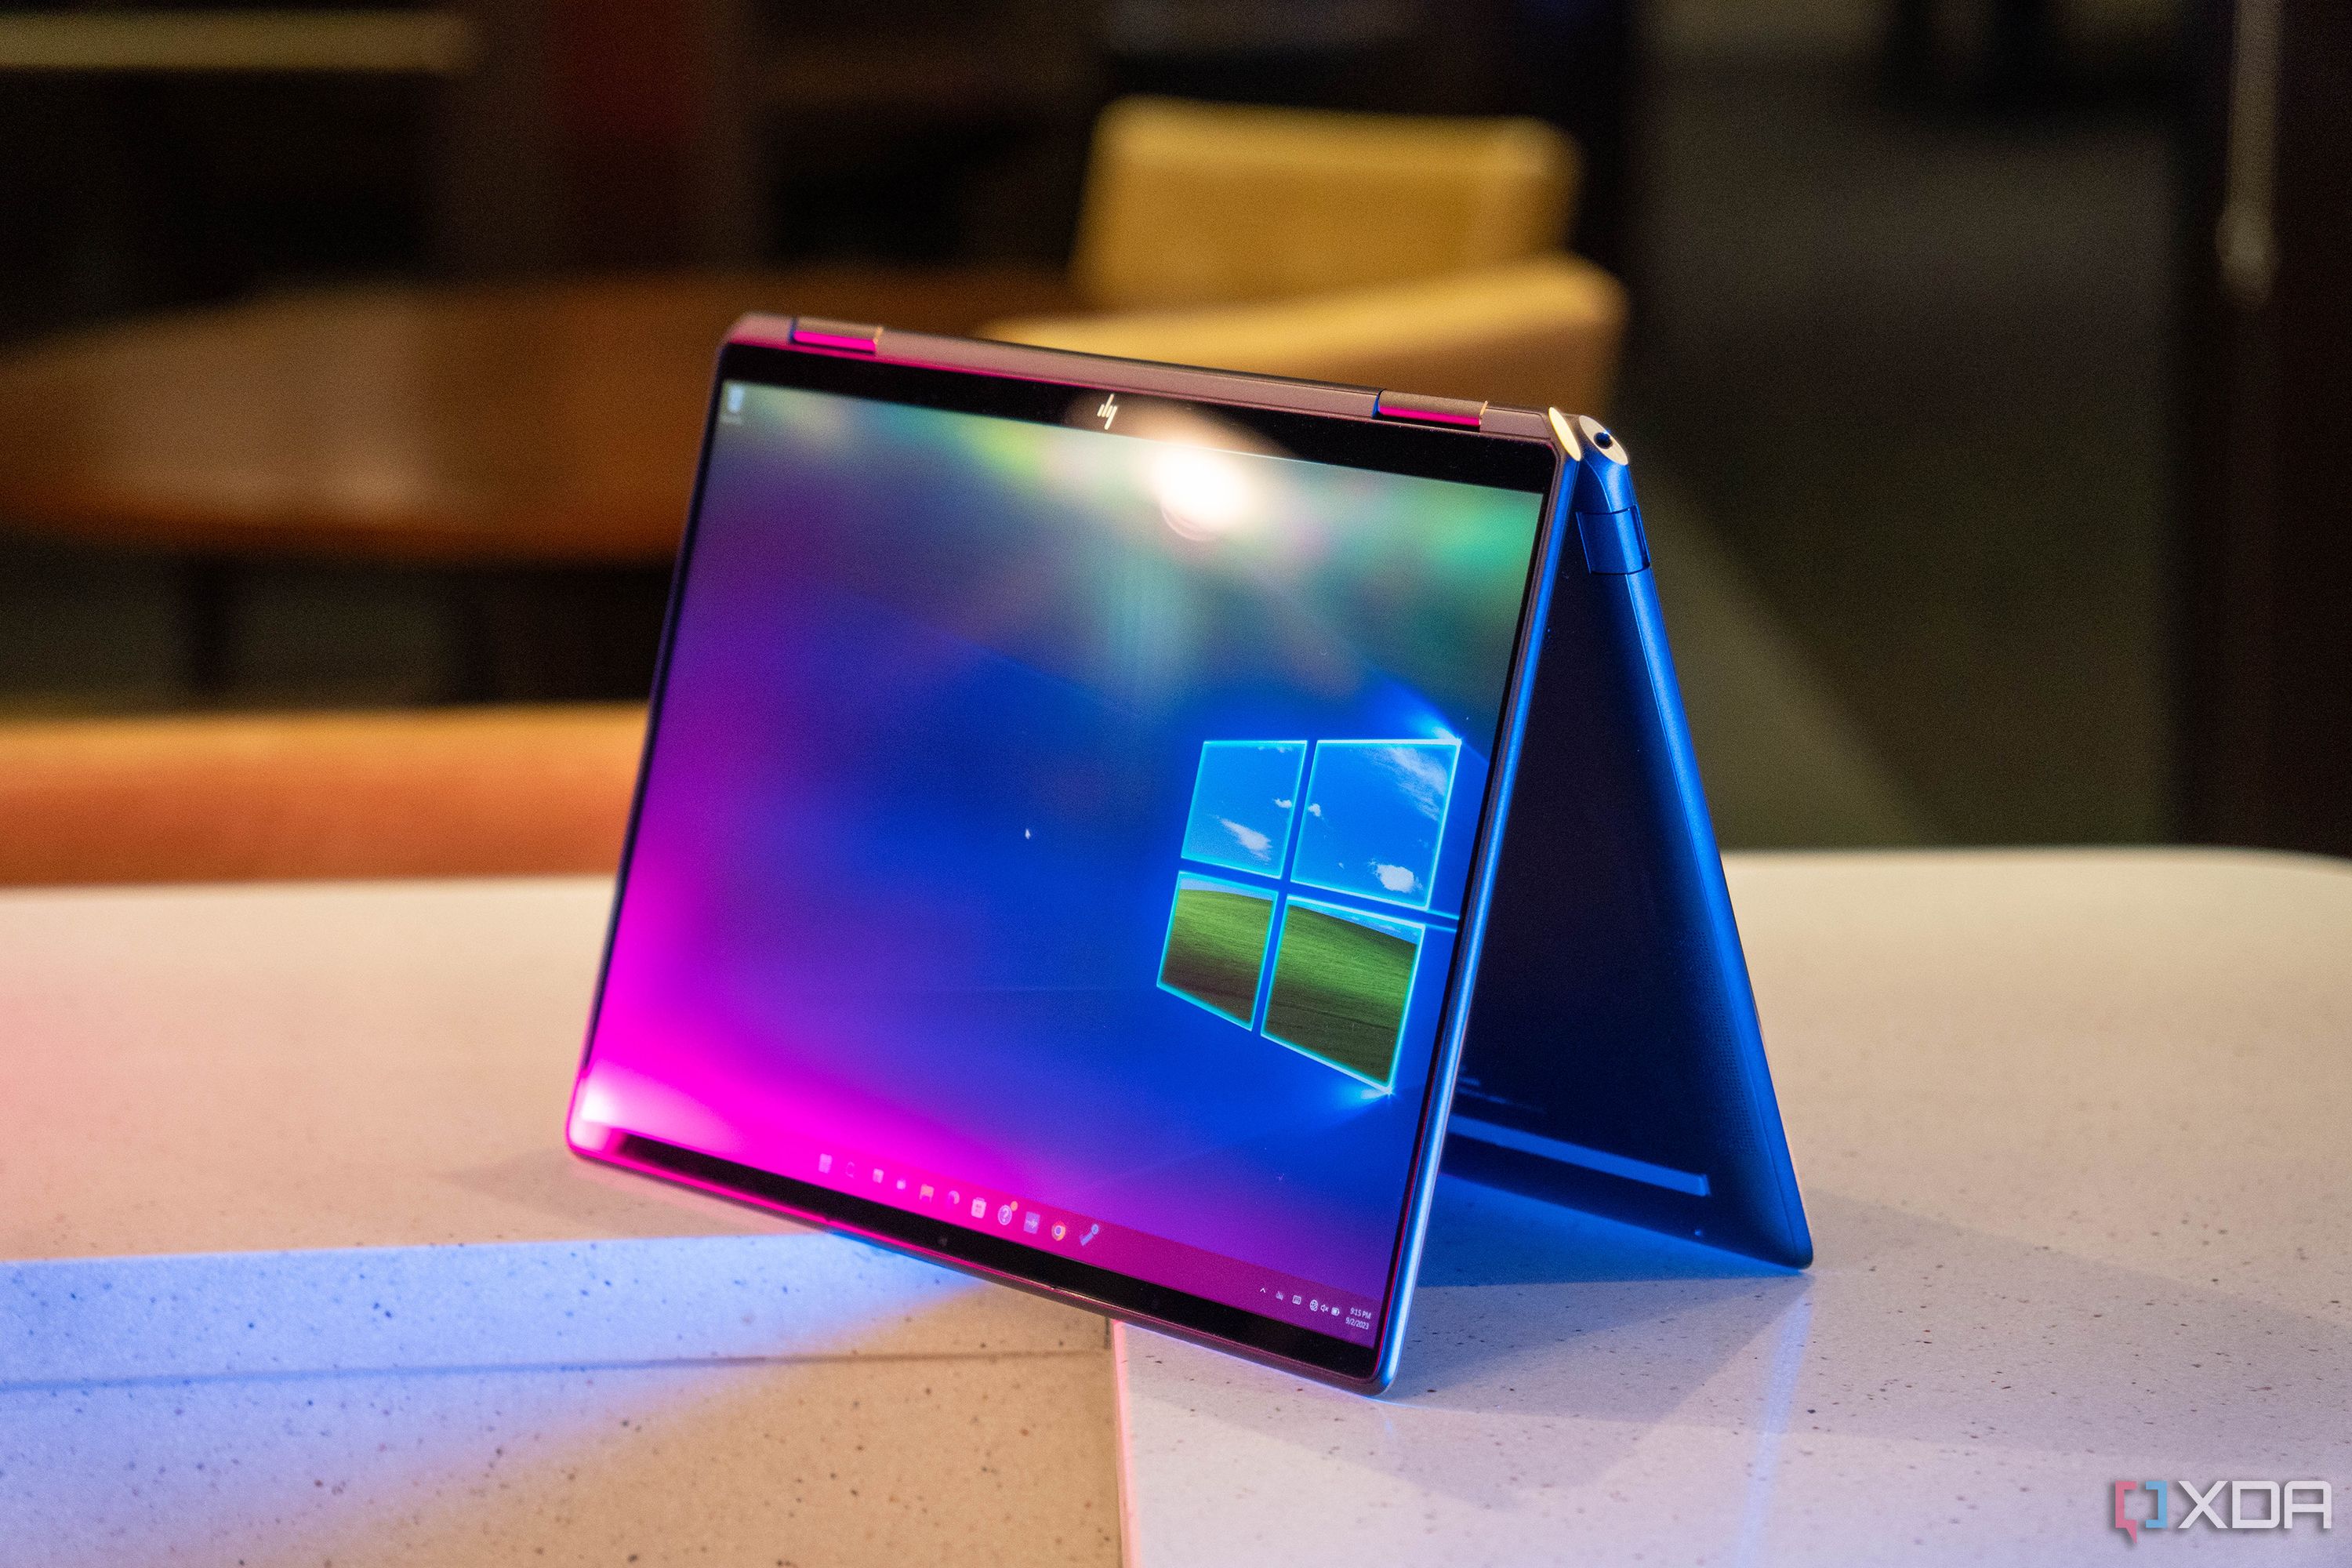 Convertible laptop on white counter with pink and blue lighting